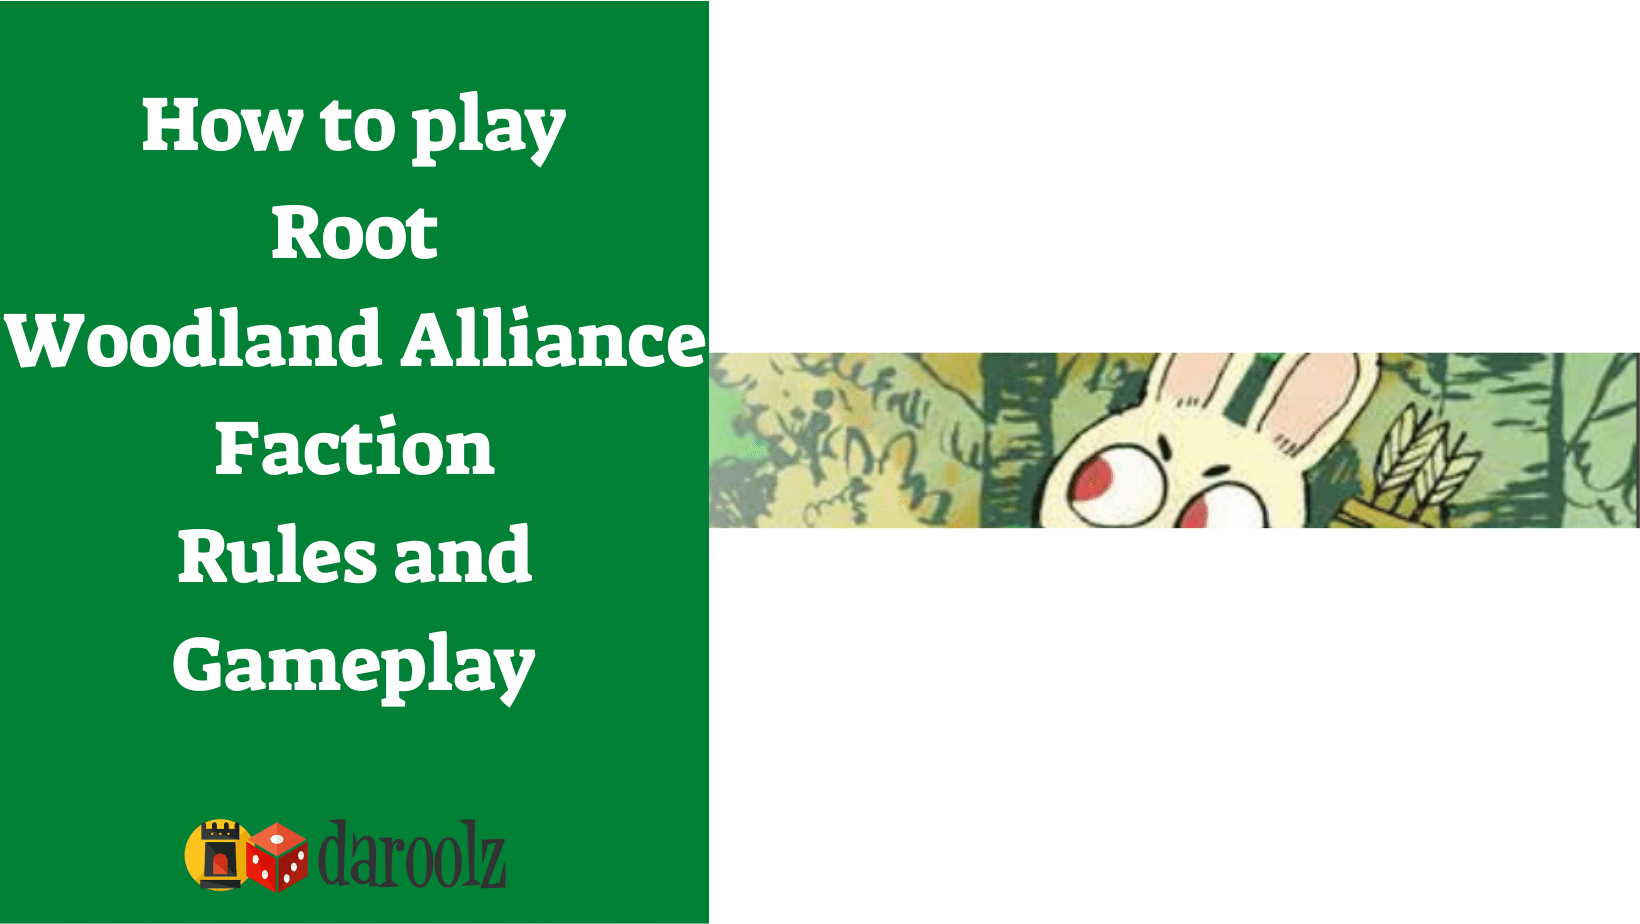 How to play root - Woodland Alliance